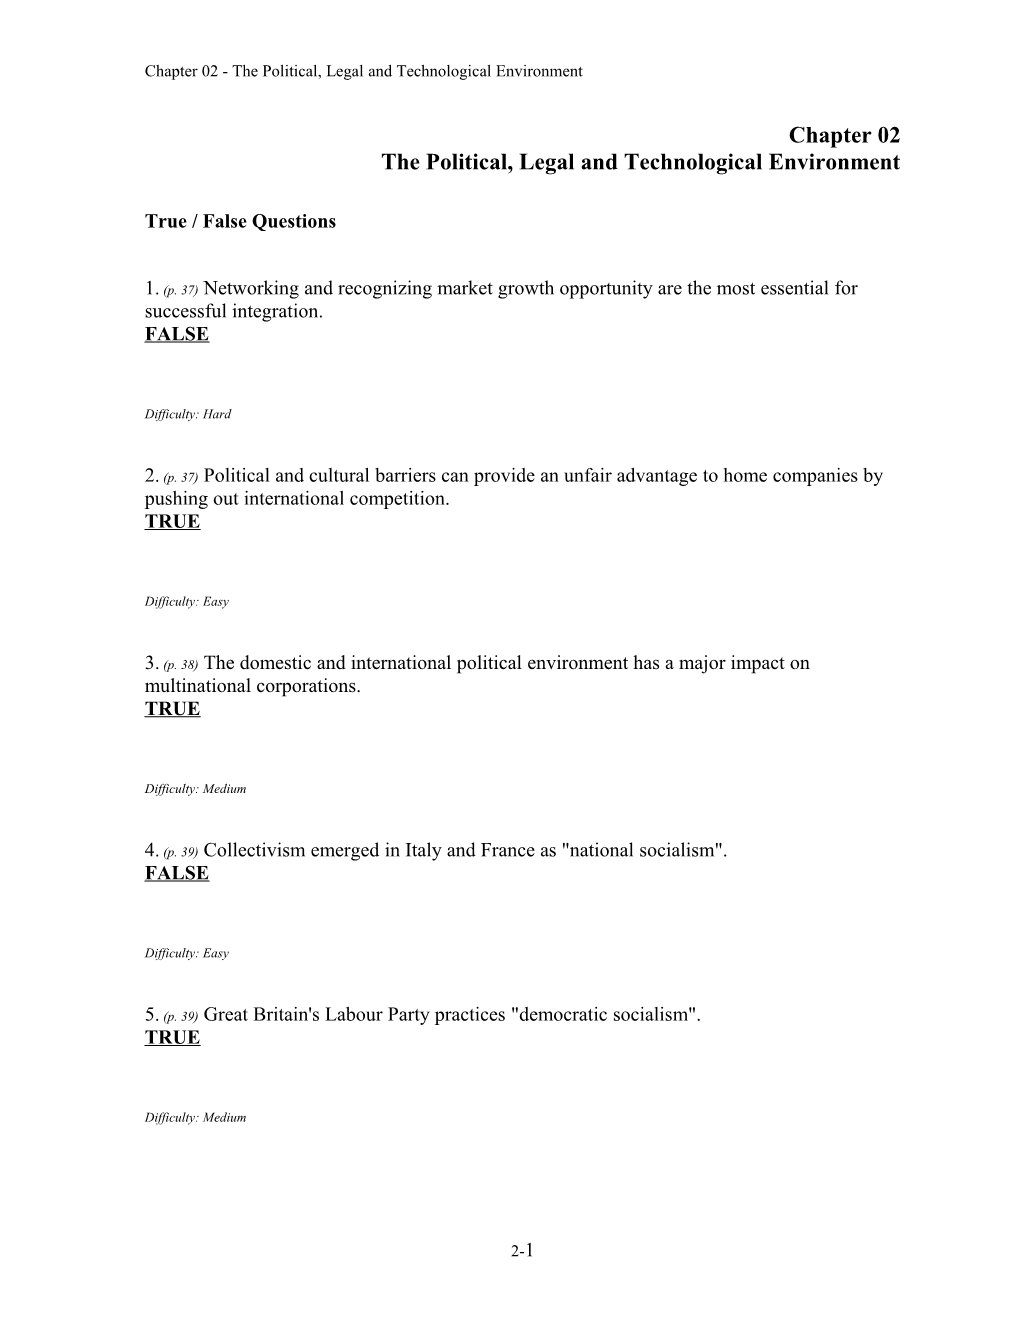 Chapter 02 the Political, Legal and Technological Environment